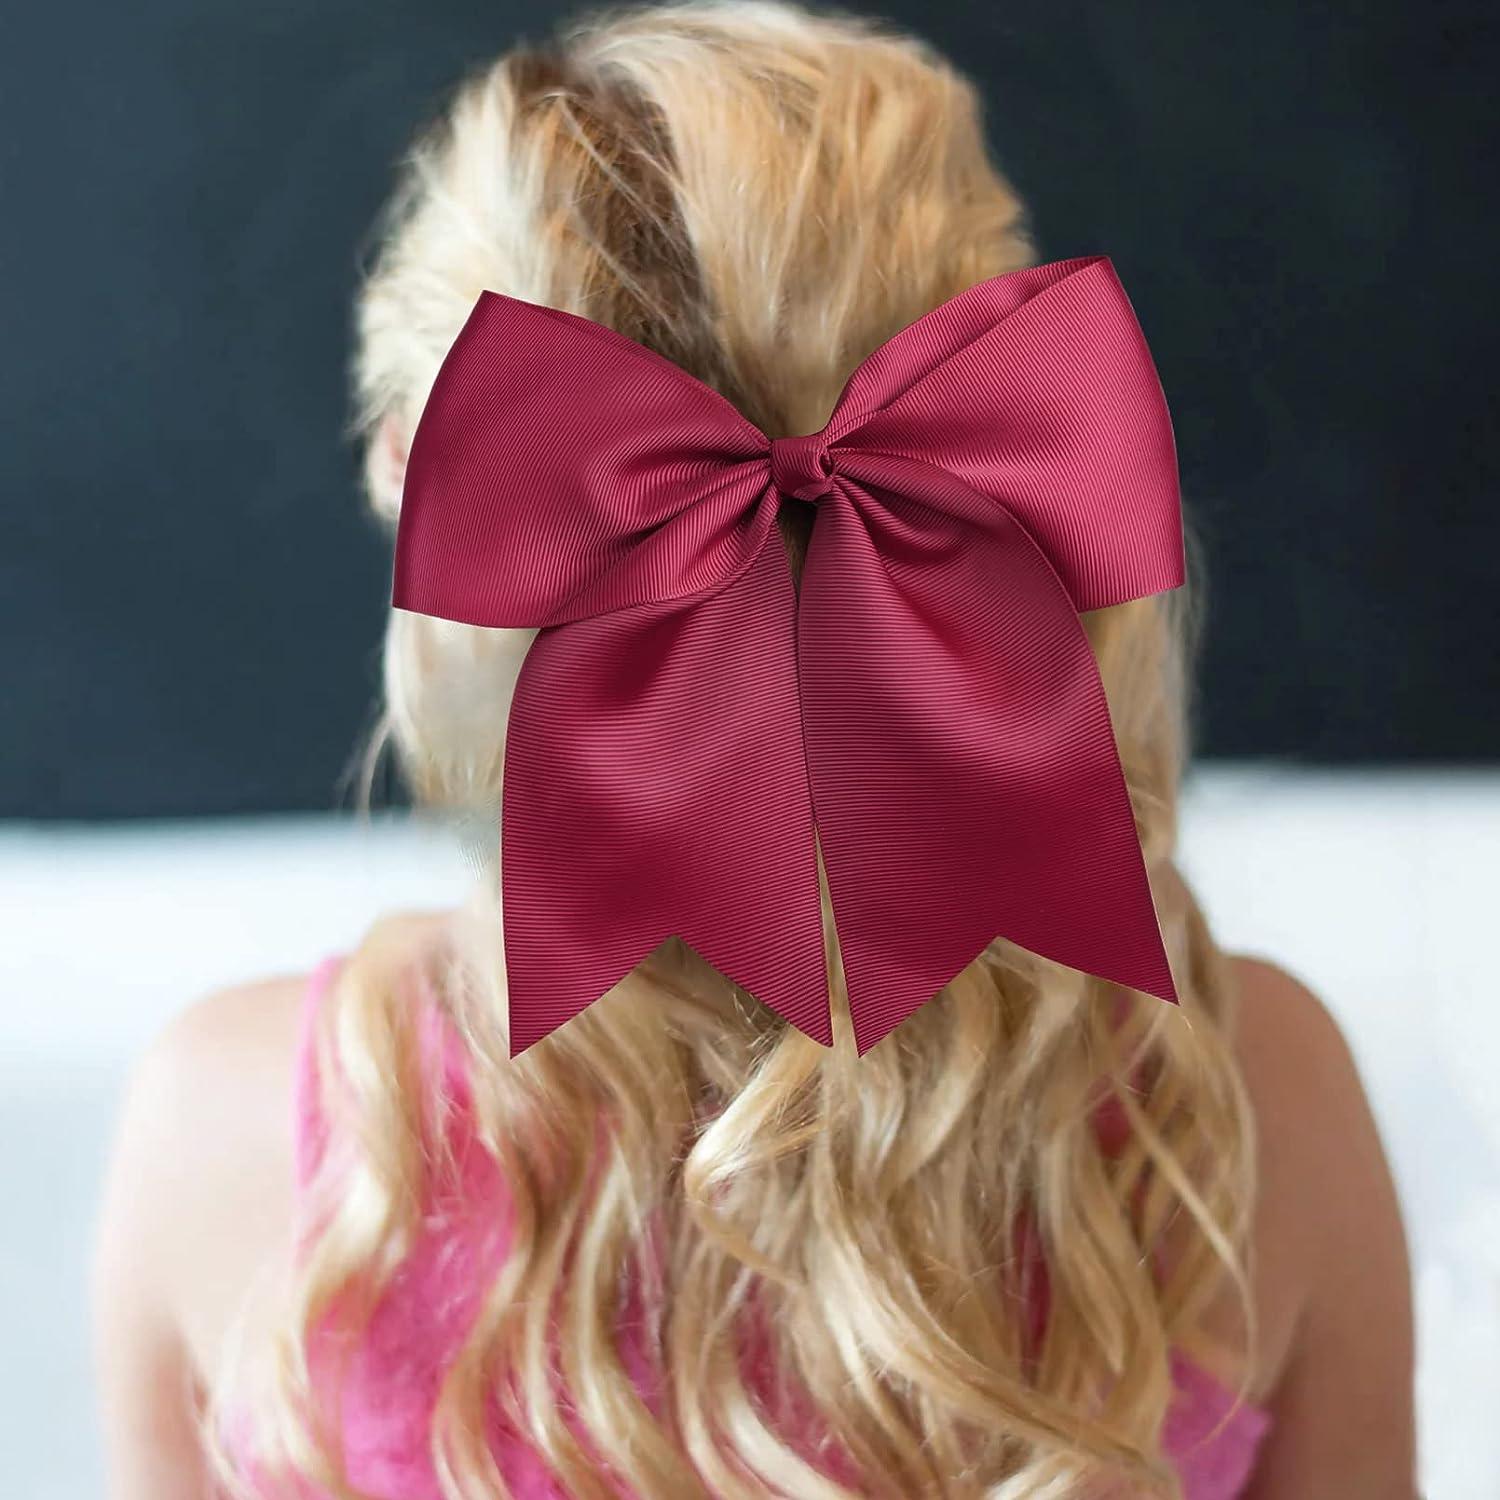 Glittery Red Long Tail Bow Hair Clip